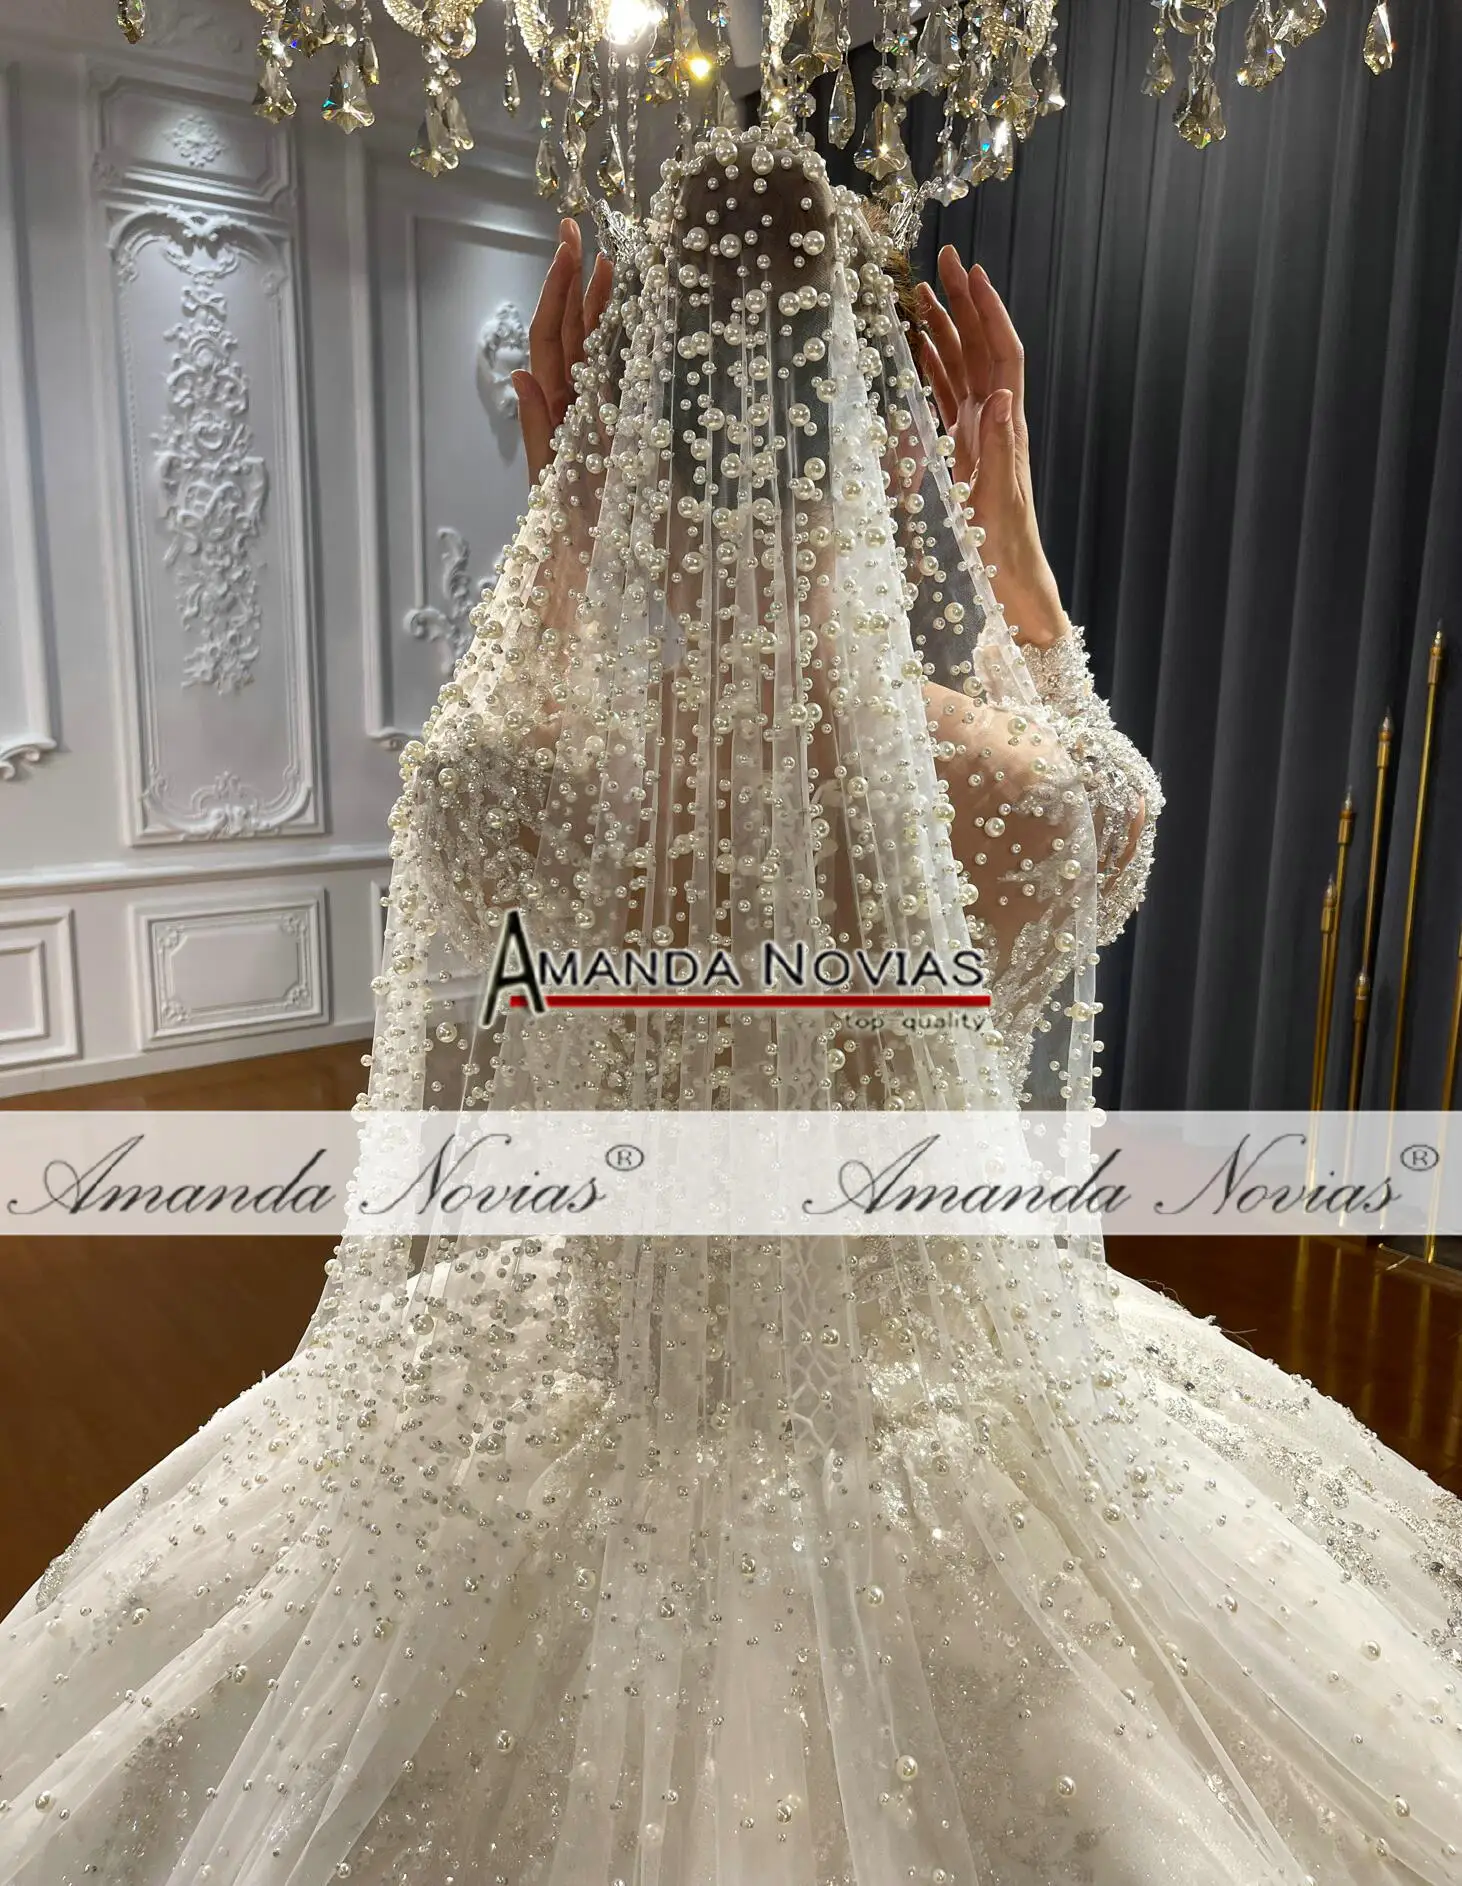 YouLaPan V10 Royal Pearl Wedding Veil Cathedral Veil Bride Long Beaded Veils  White Ivory Wedding Veils with Comb Luxurious